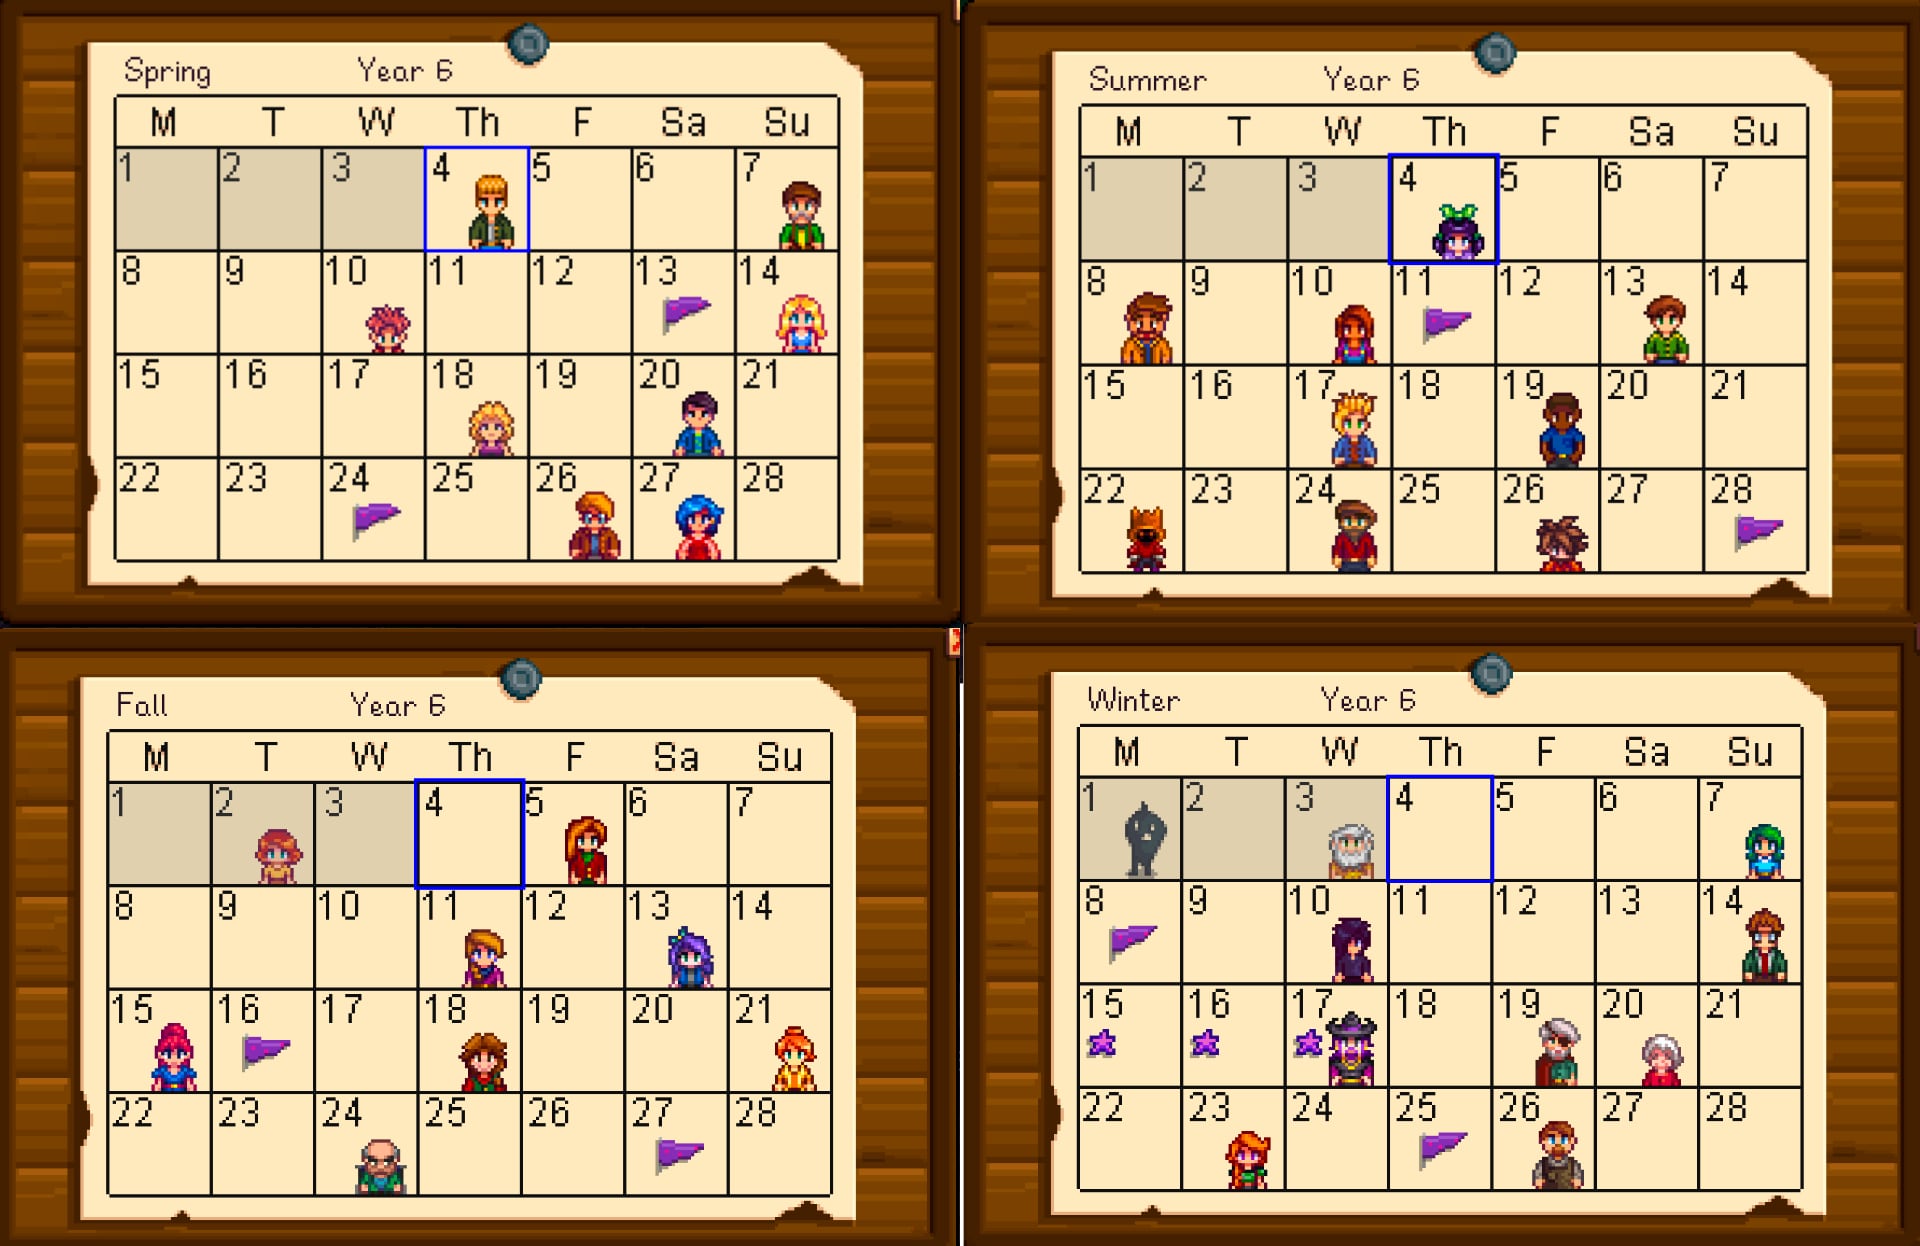 the Calendar in Stardew Valley, where all the birthdays are marked.